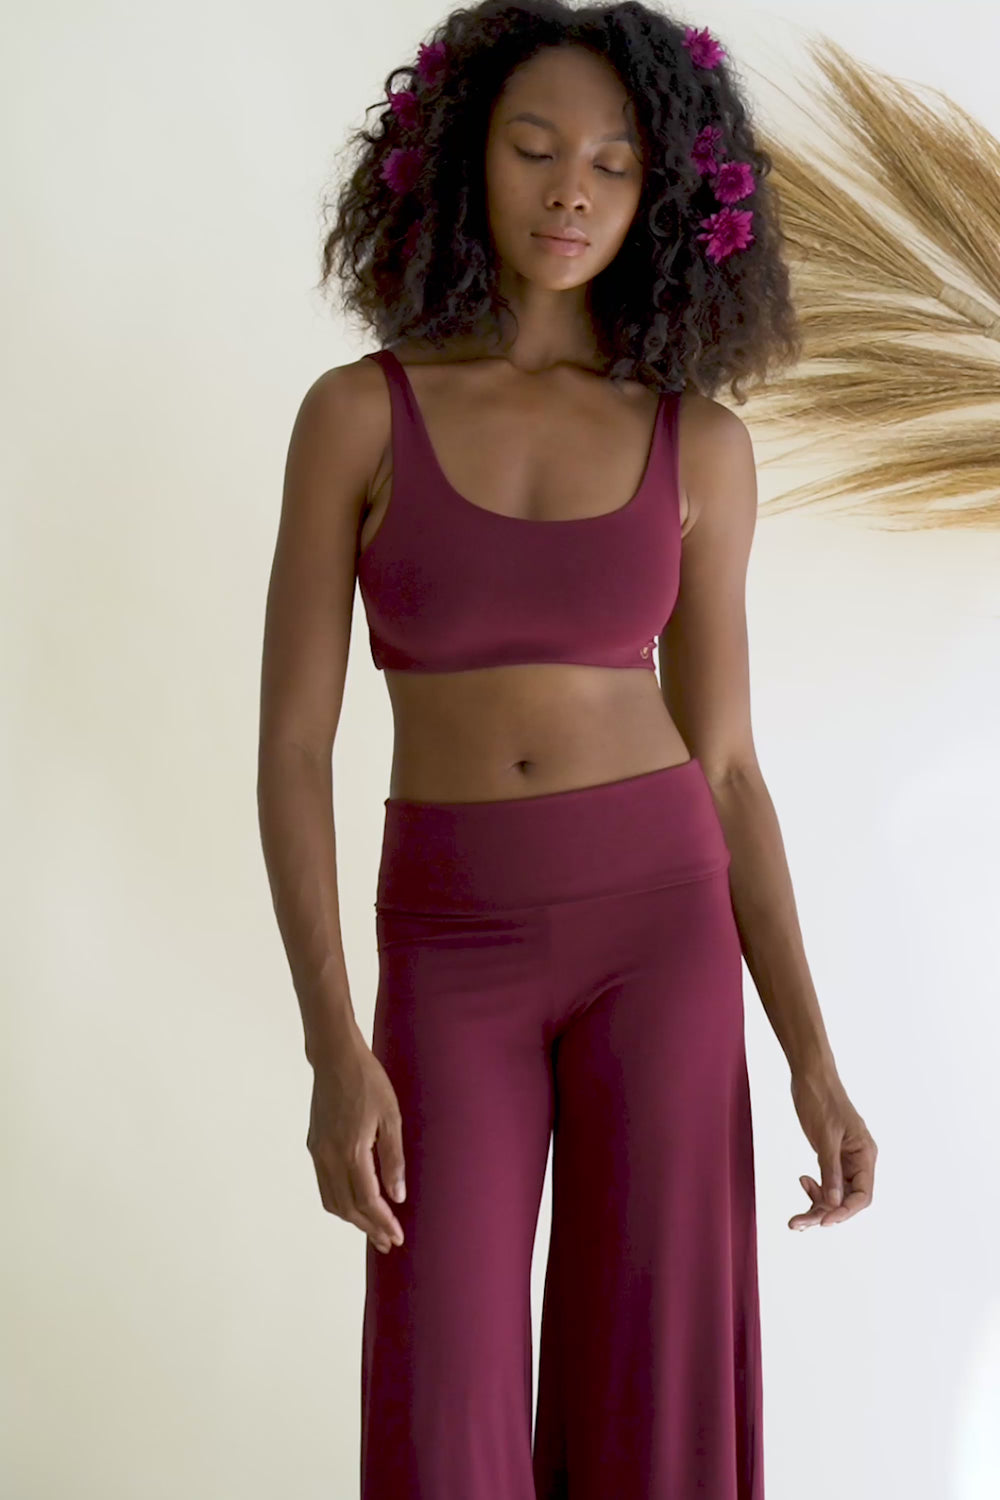 Layla Flares and Boxy Crop in Aubergine was dearly missed, so we